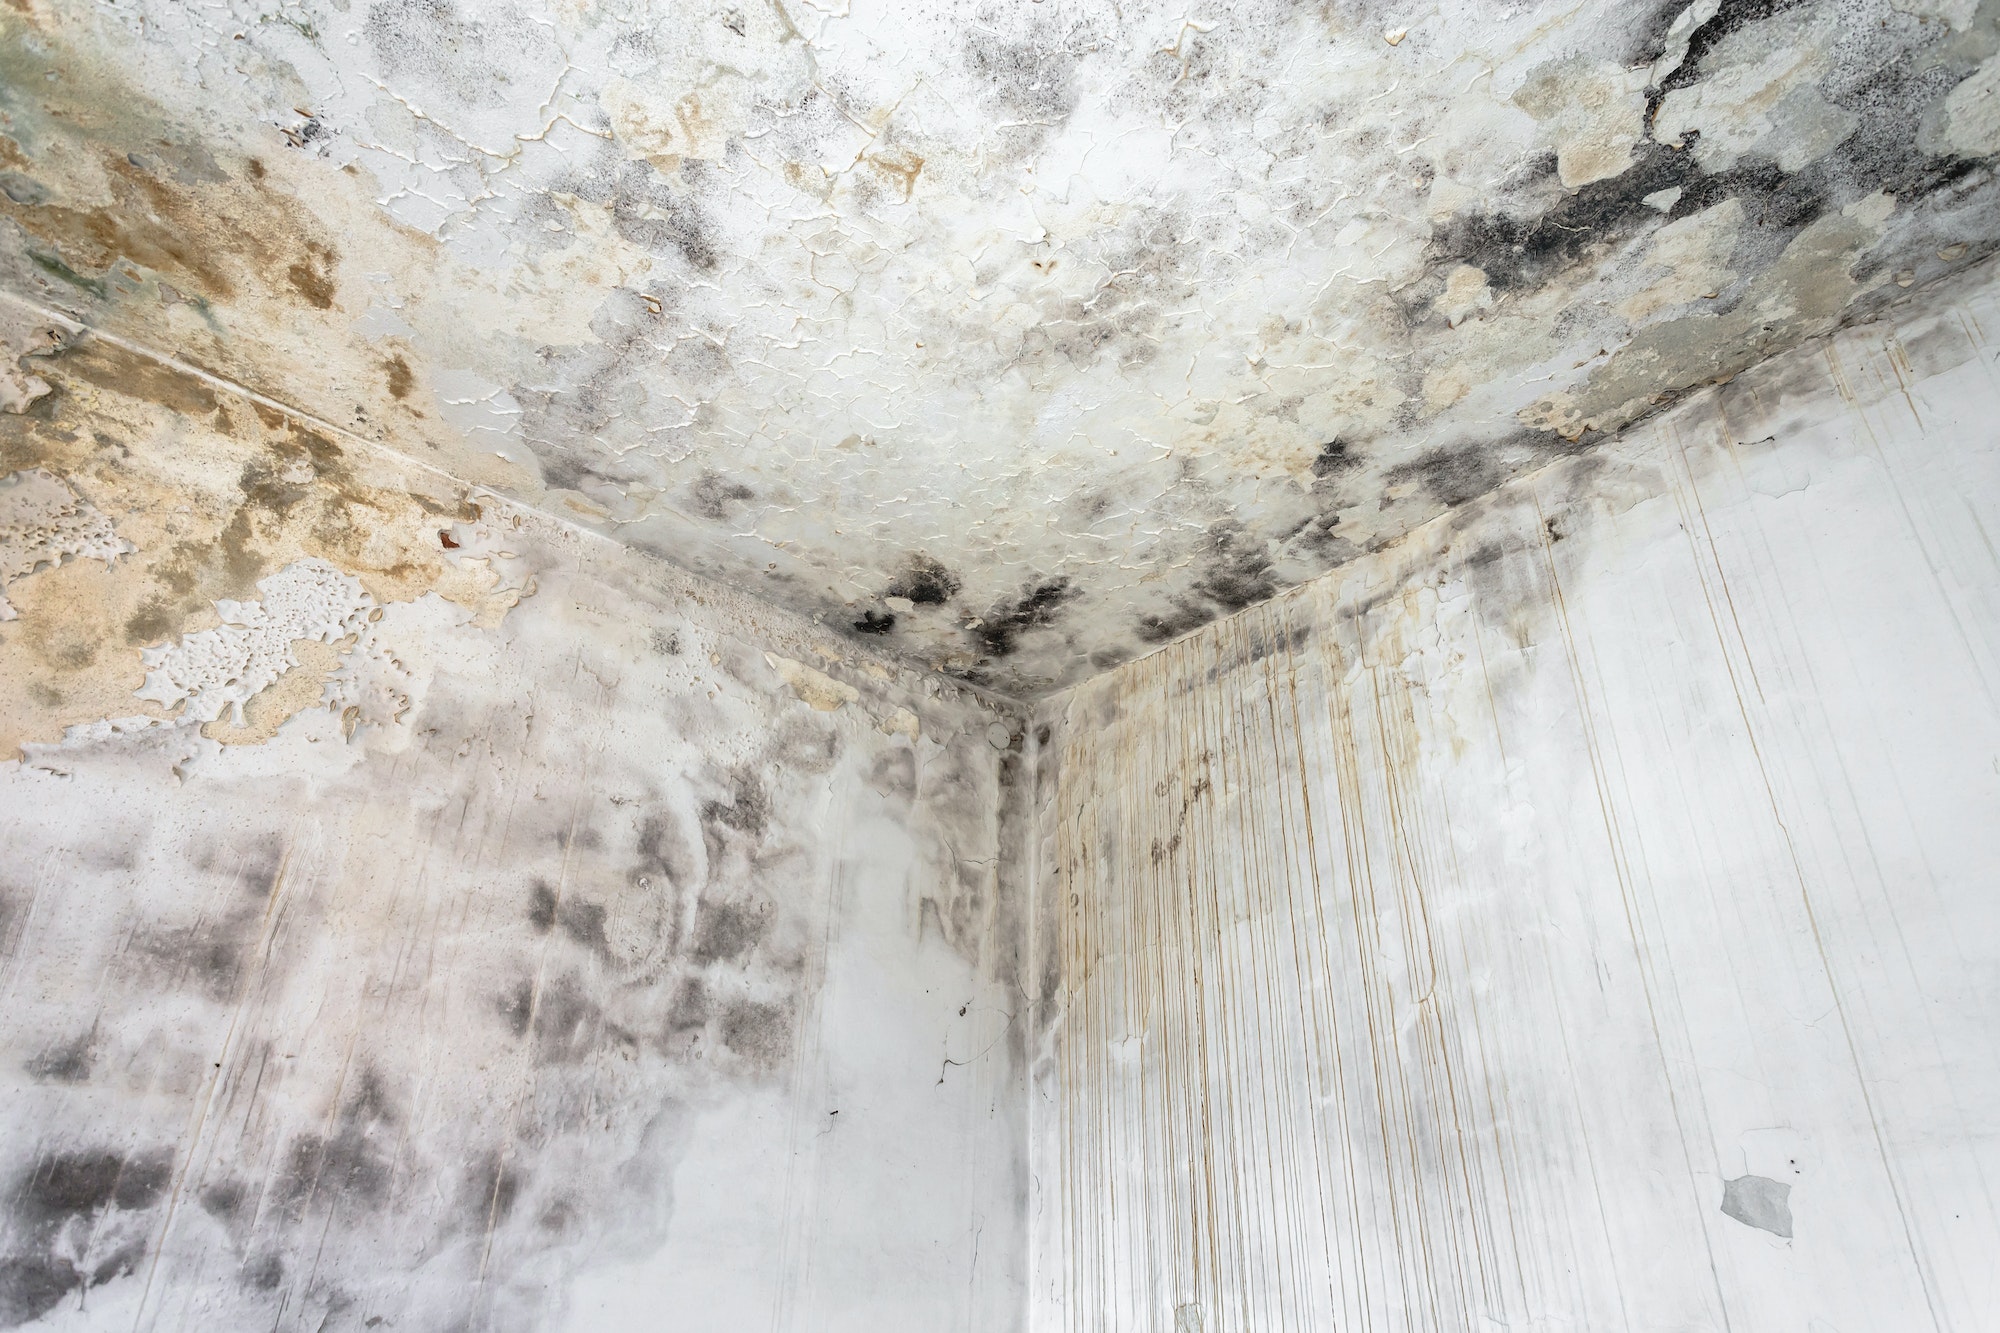 Fungal growth on interior wall. we perform mold inspection, mold testing and remediation in Tampa, Naples, Clearwater and Sarasota, FL